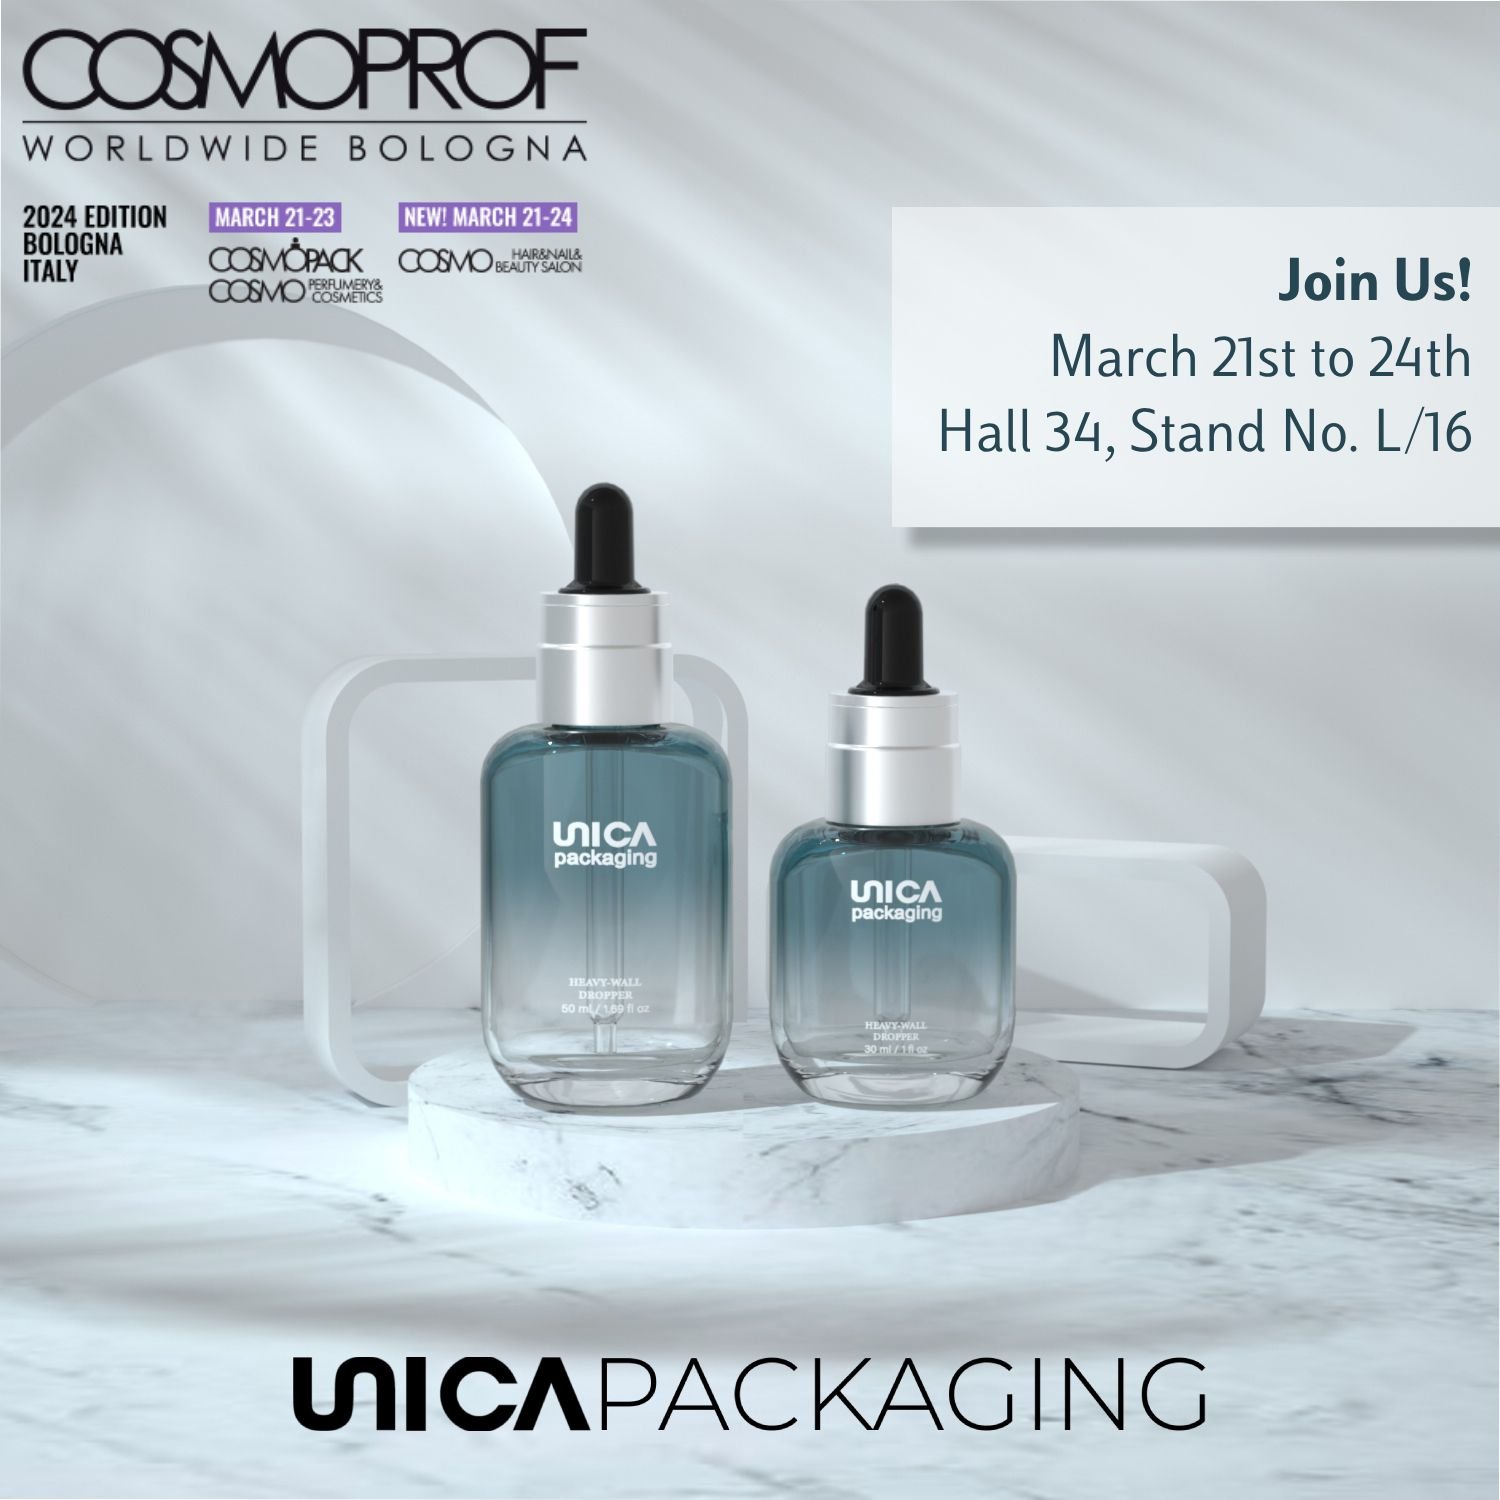 Unica Packaging to Exhibit at Cosmoprof Bologna 2024 – Join Us at Hall 34, Stand L/16